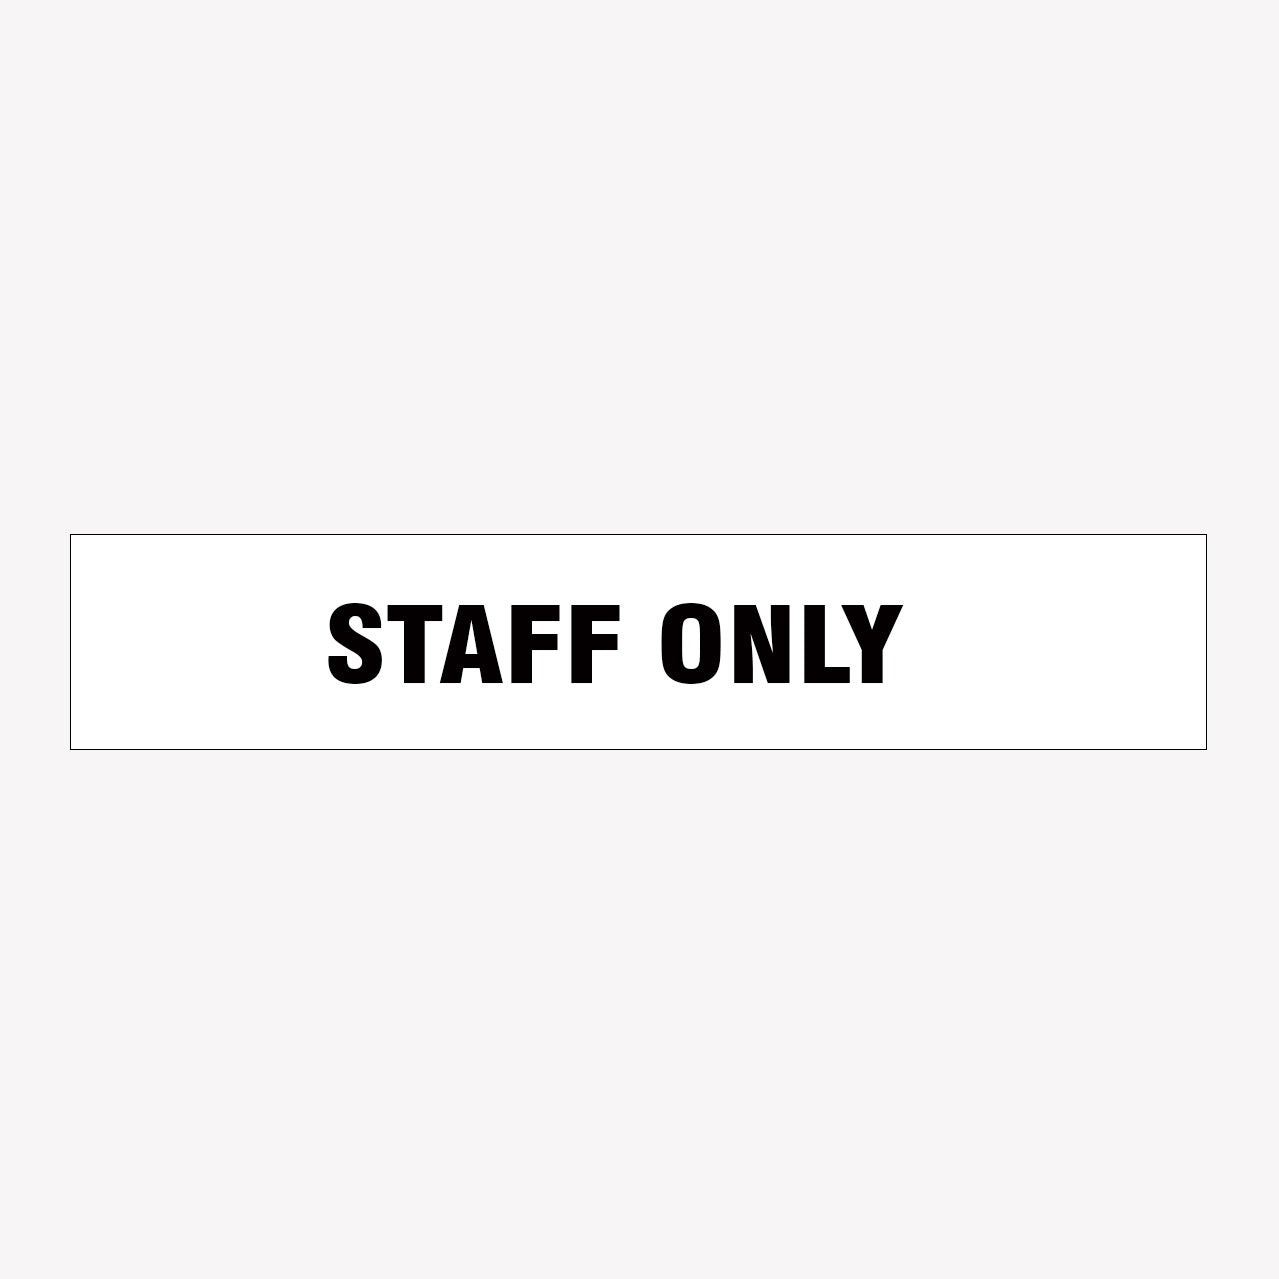 STAFF ONLY SIGN - GET SIGNS